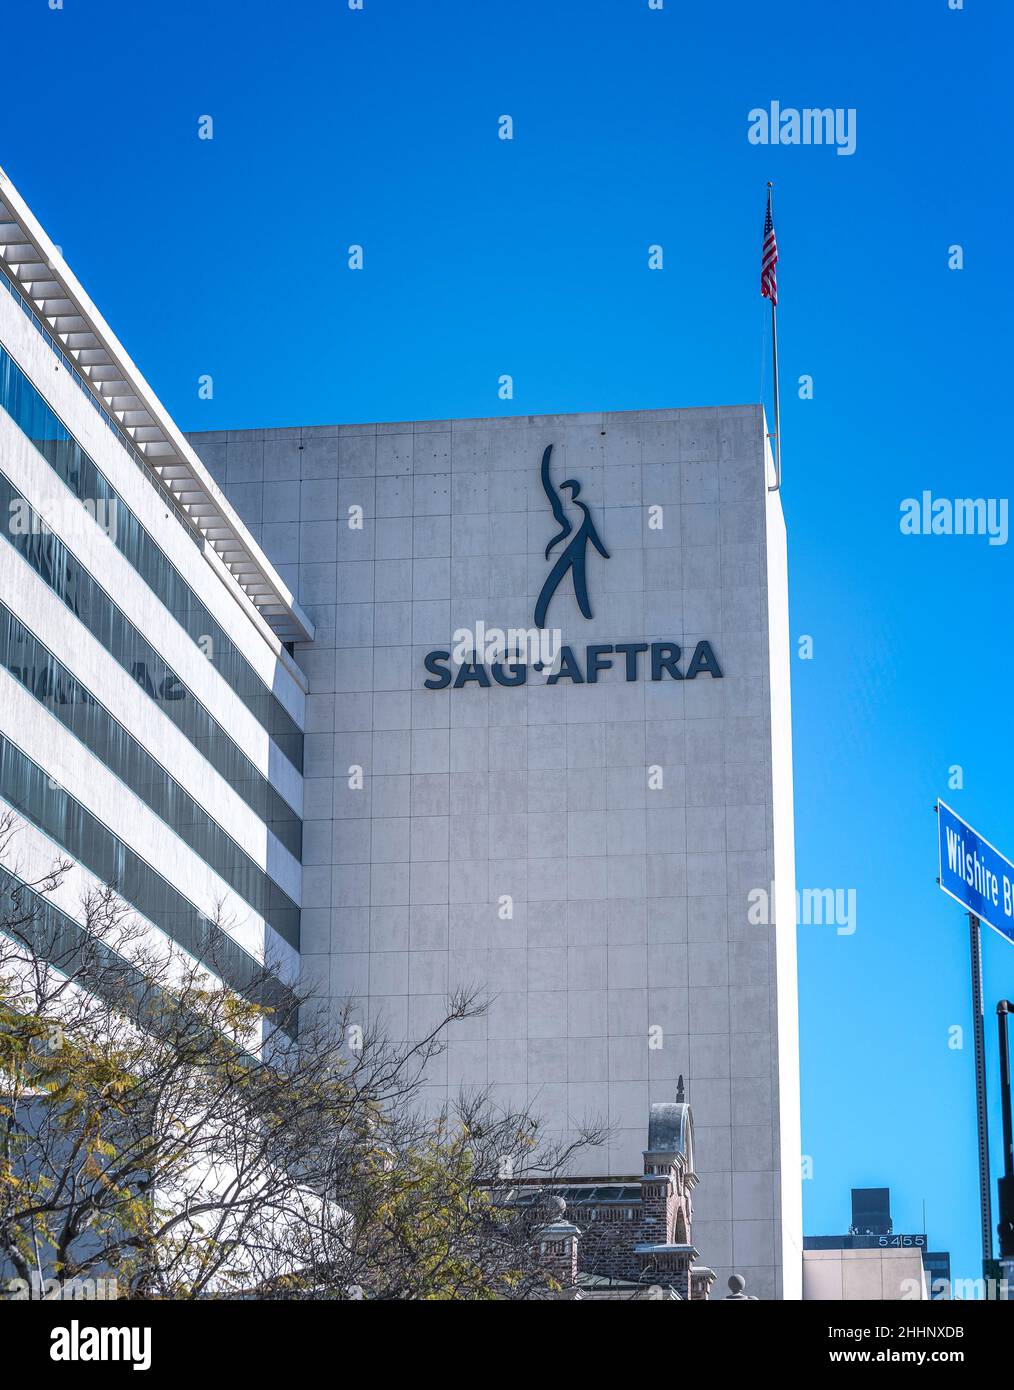 Los Angeles, CA, USA - January 26, 2022: Exterior of the SAG-AFTRA Labor union building on Wilshire boulevard in Los Angeles, CA. Stock Photo